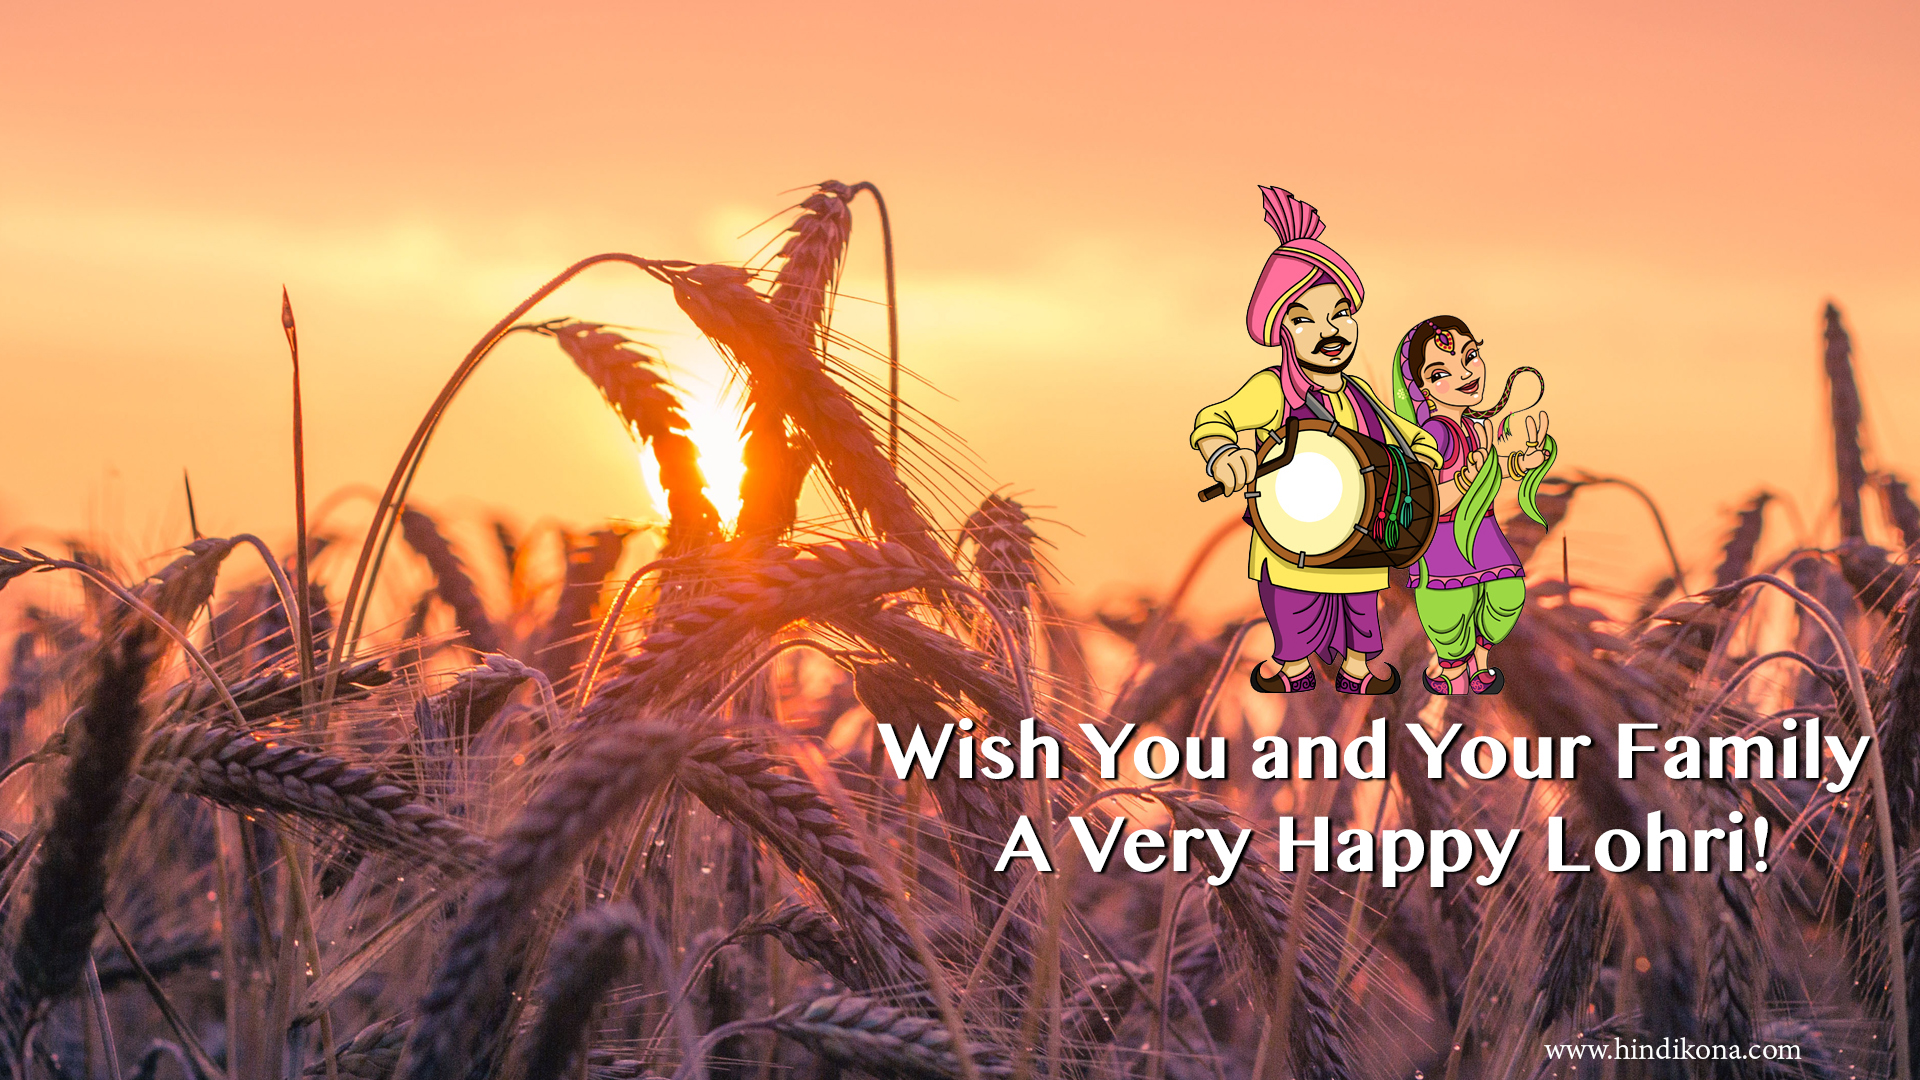 wish you and your family a very happy lohri